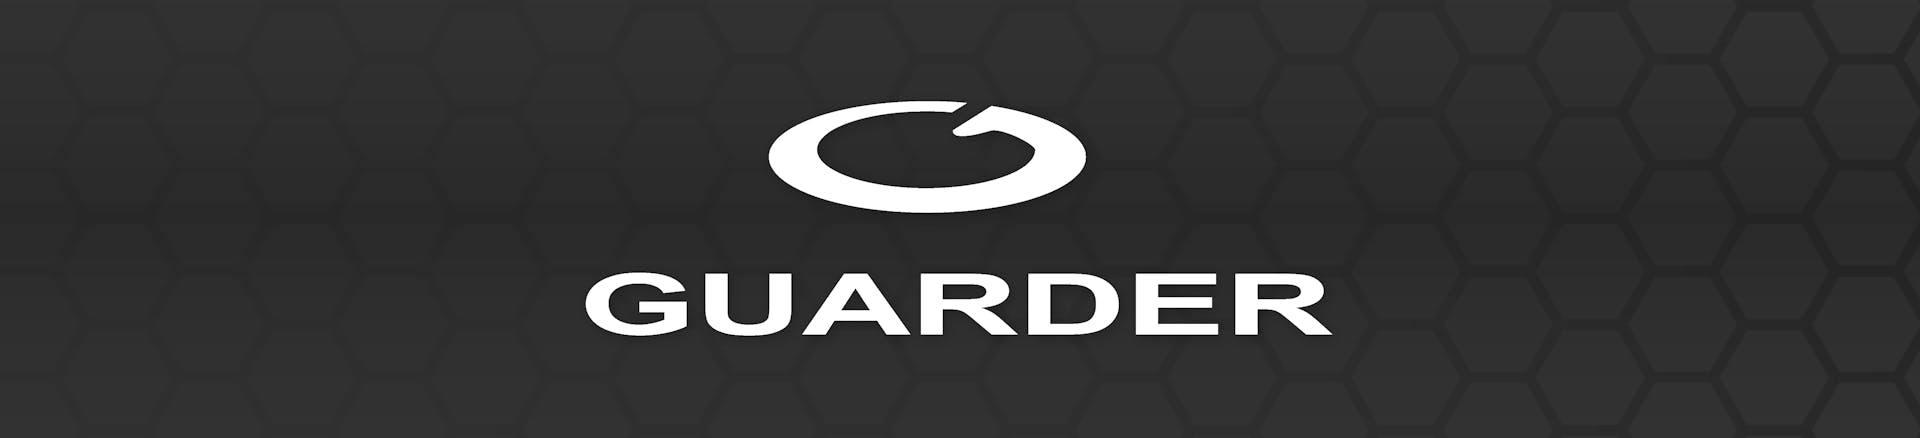 Guarder Airsoft